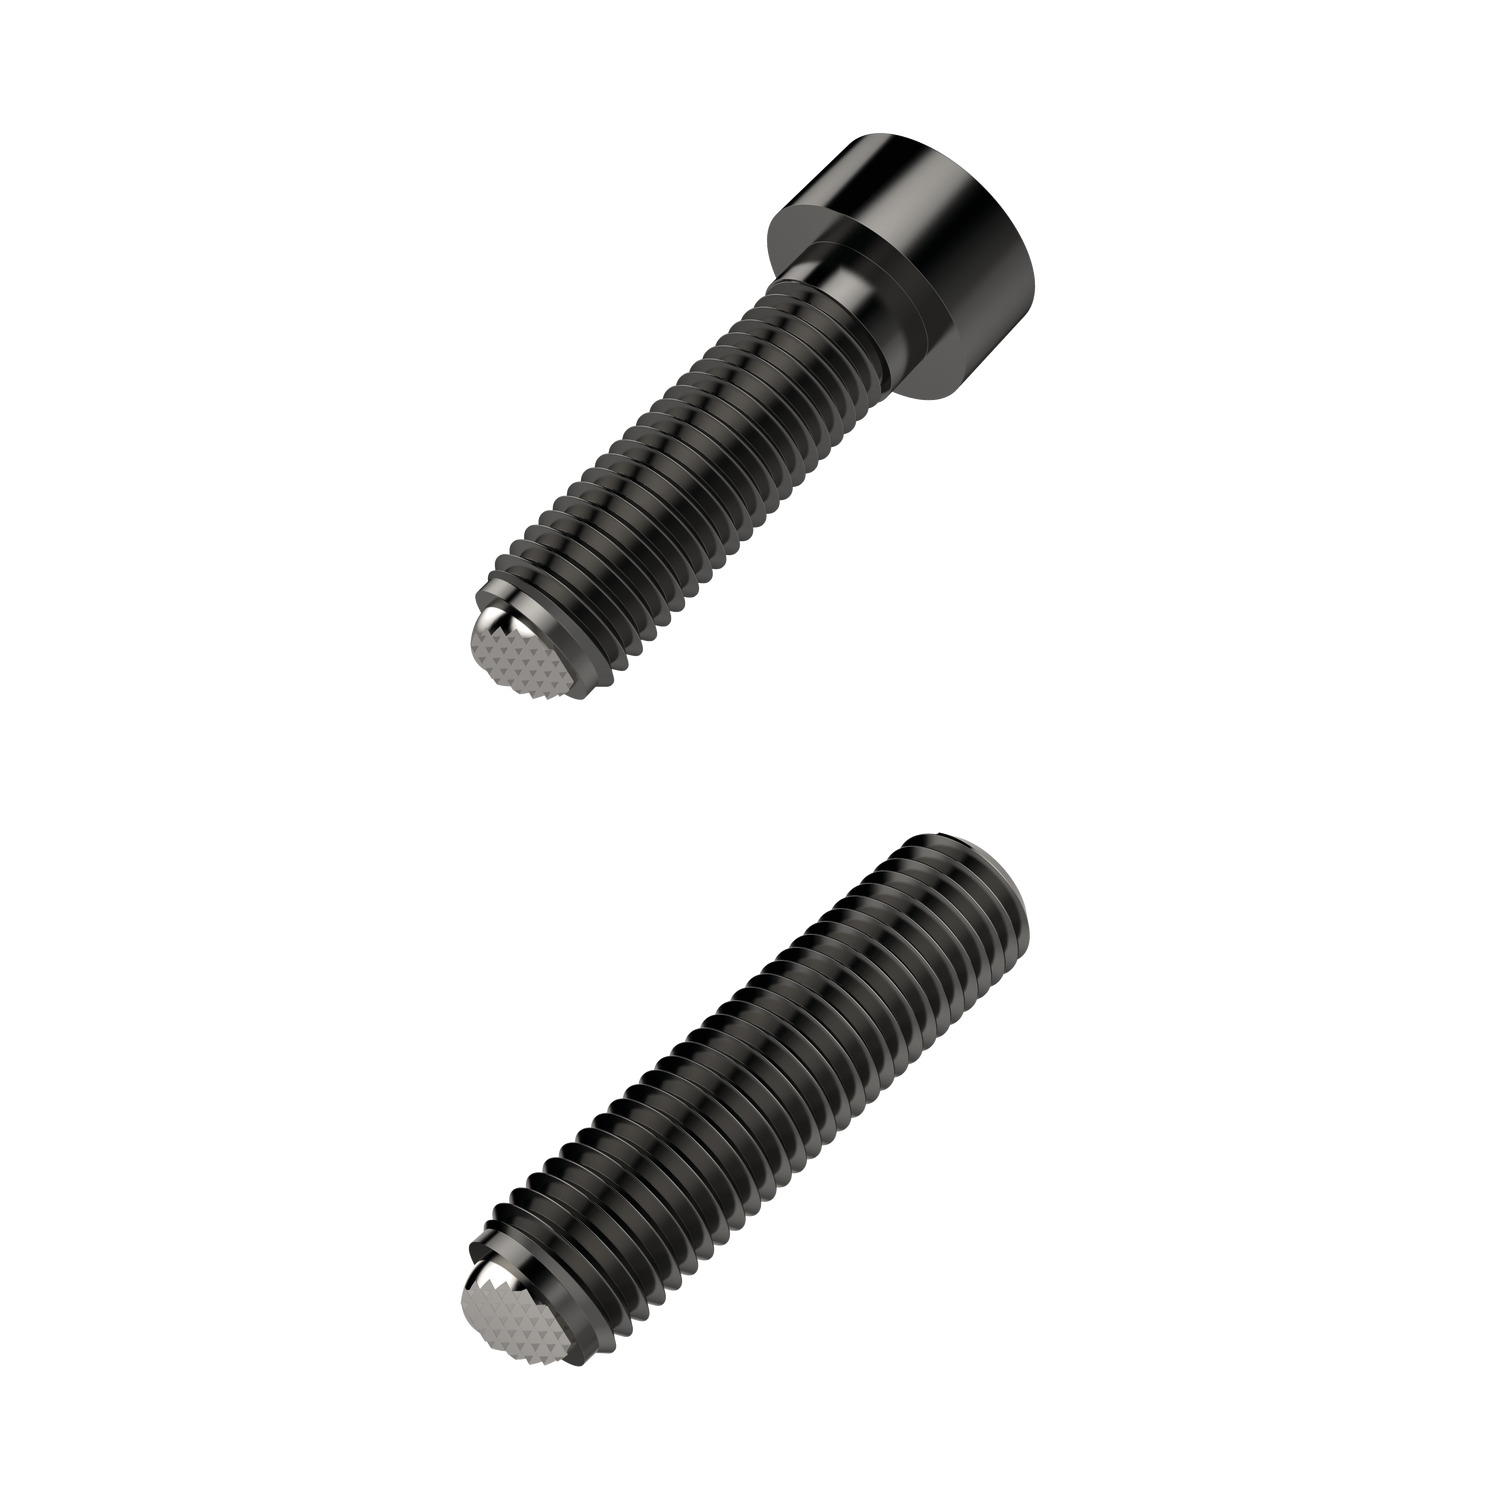 Product 34000, Thrust Screws - Steel ball ended - flat - metal - secured / 